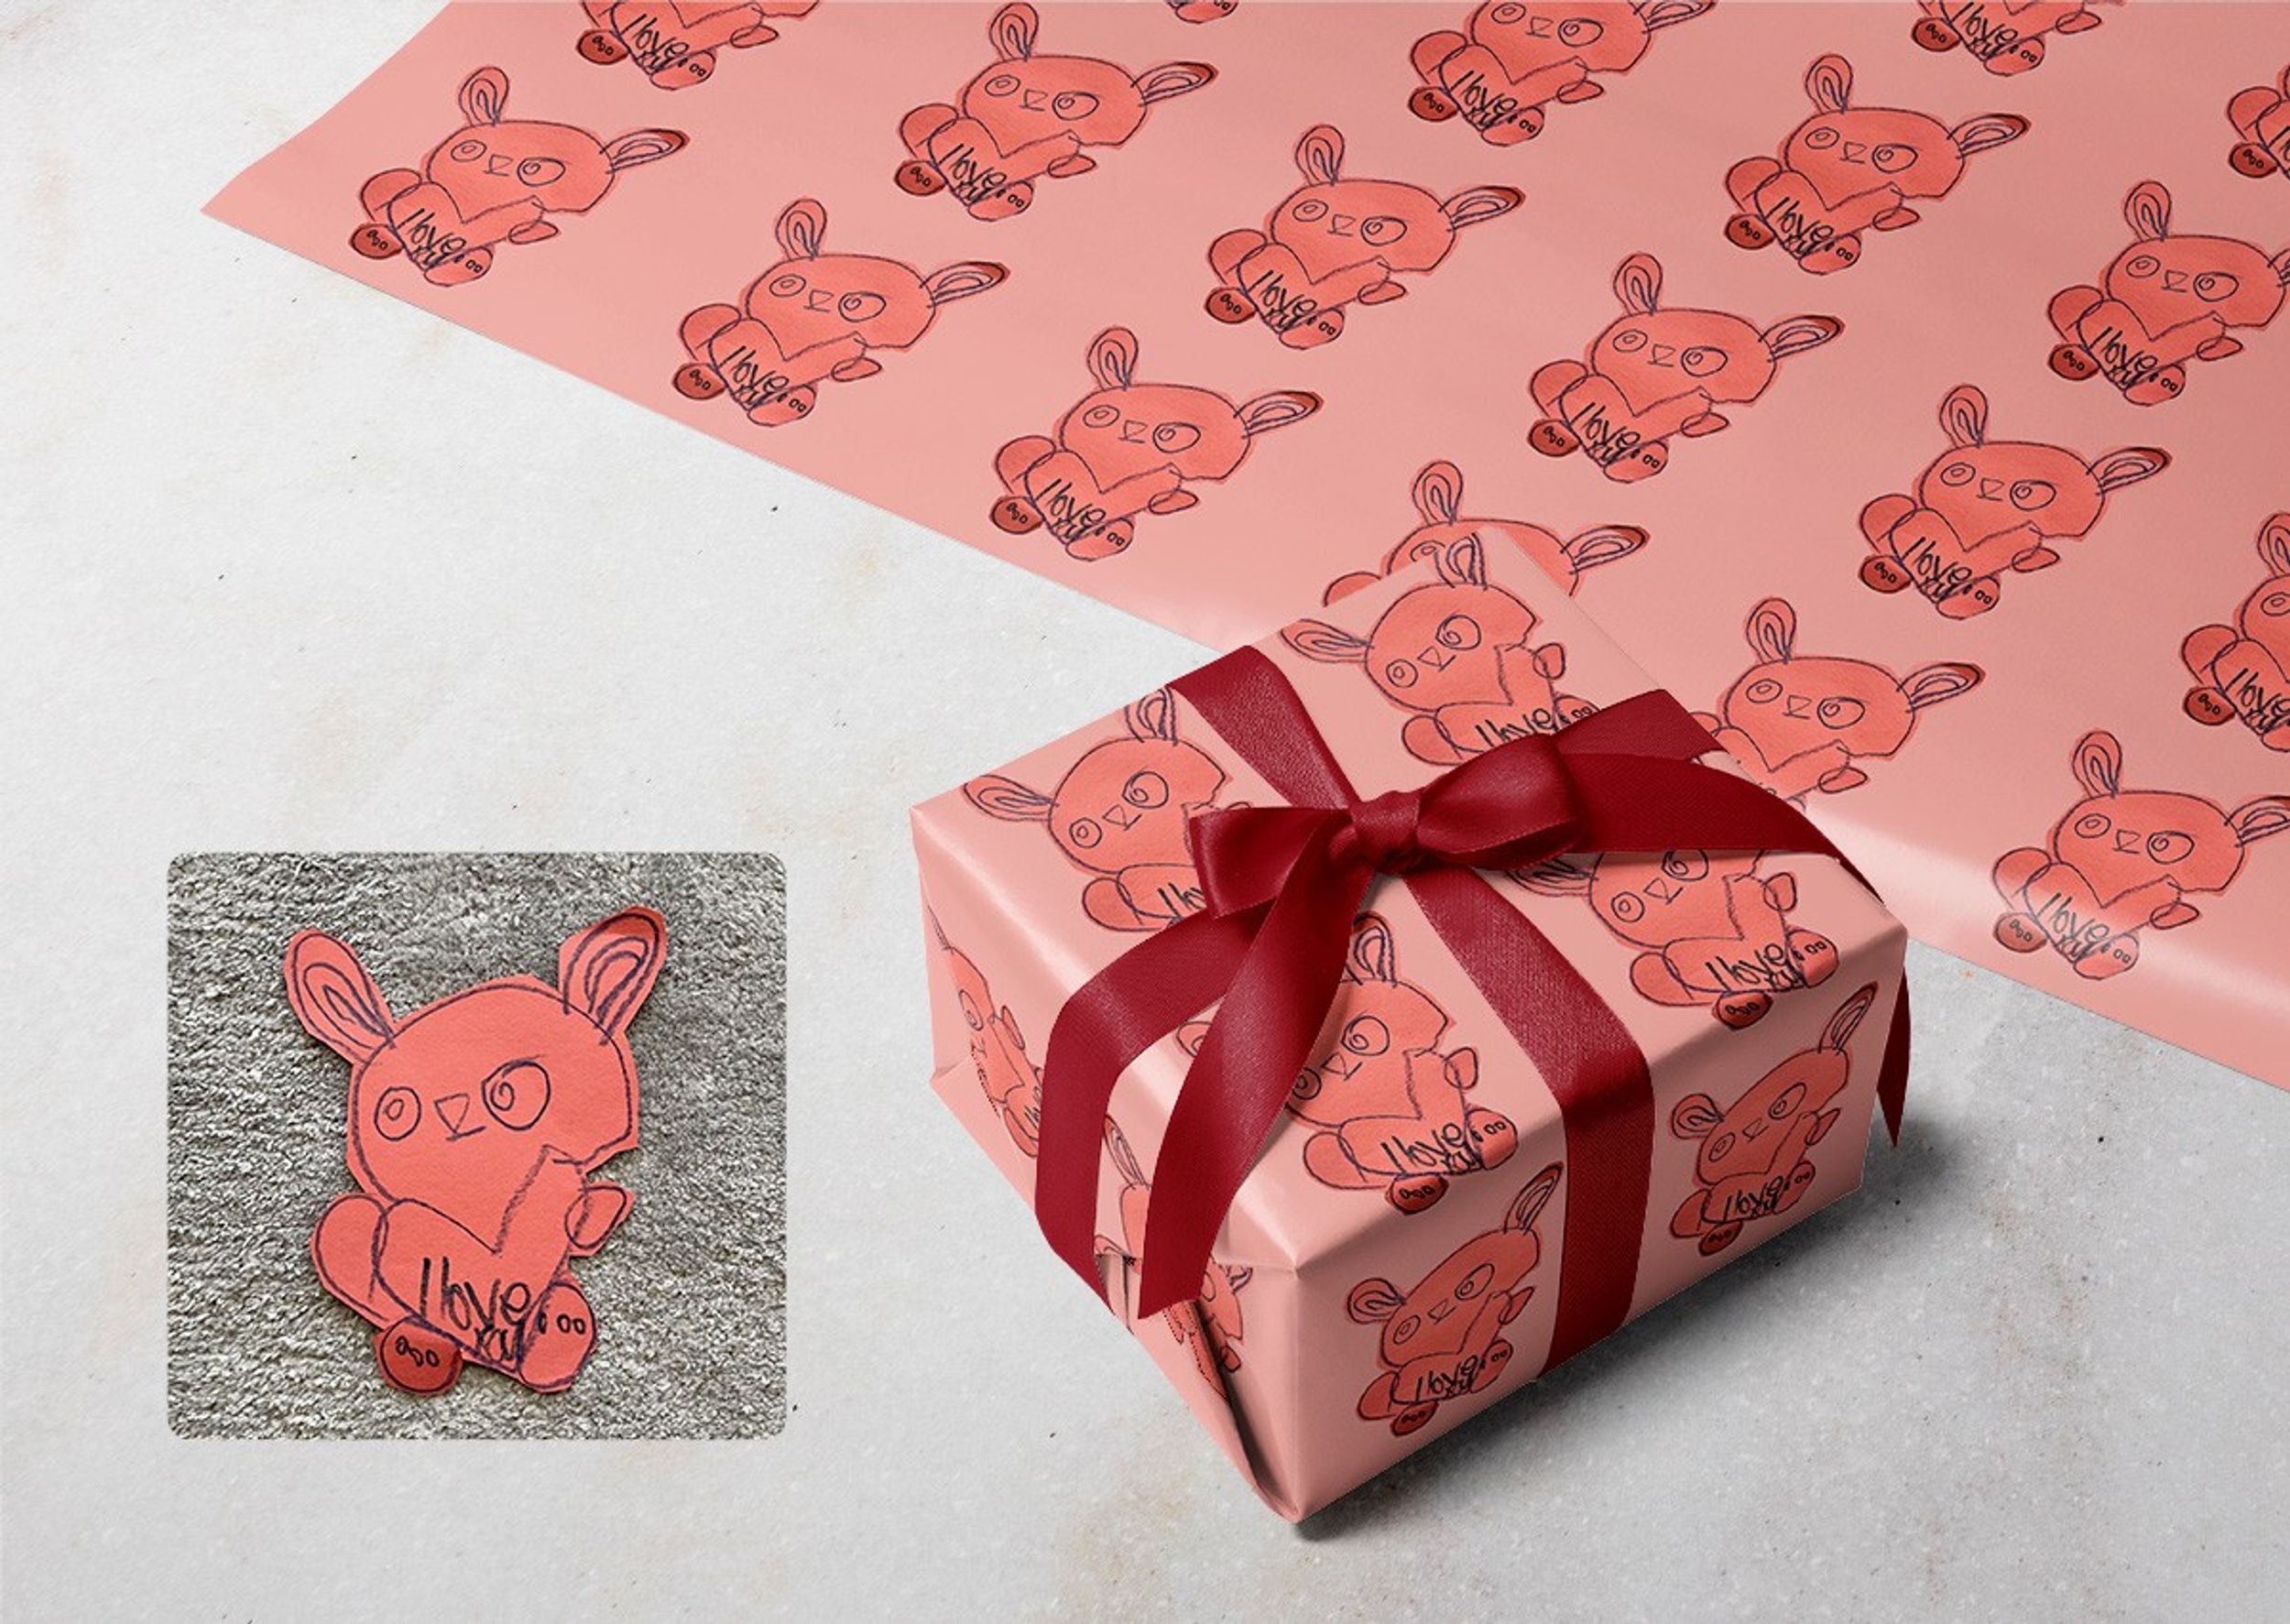 Scribble gift wrap shown with a wrapped present and the original photo